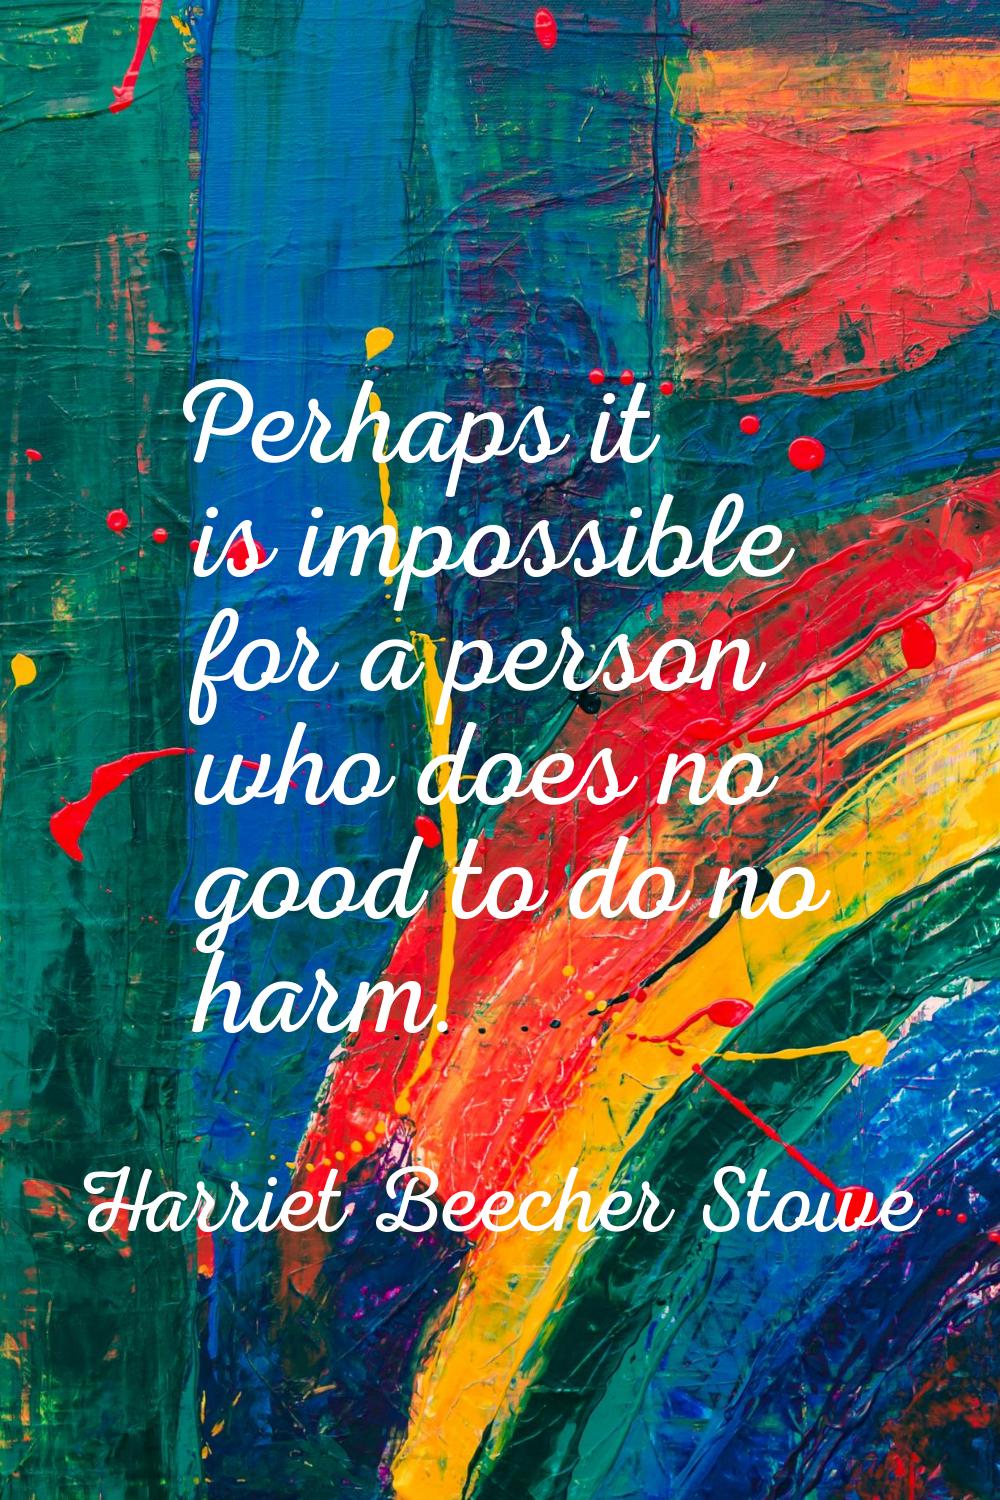 Perhaps it is impossible for a person who does no good to do no harm.